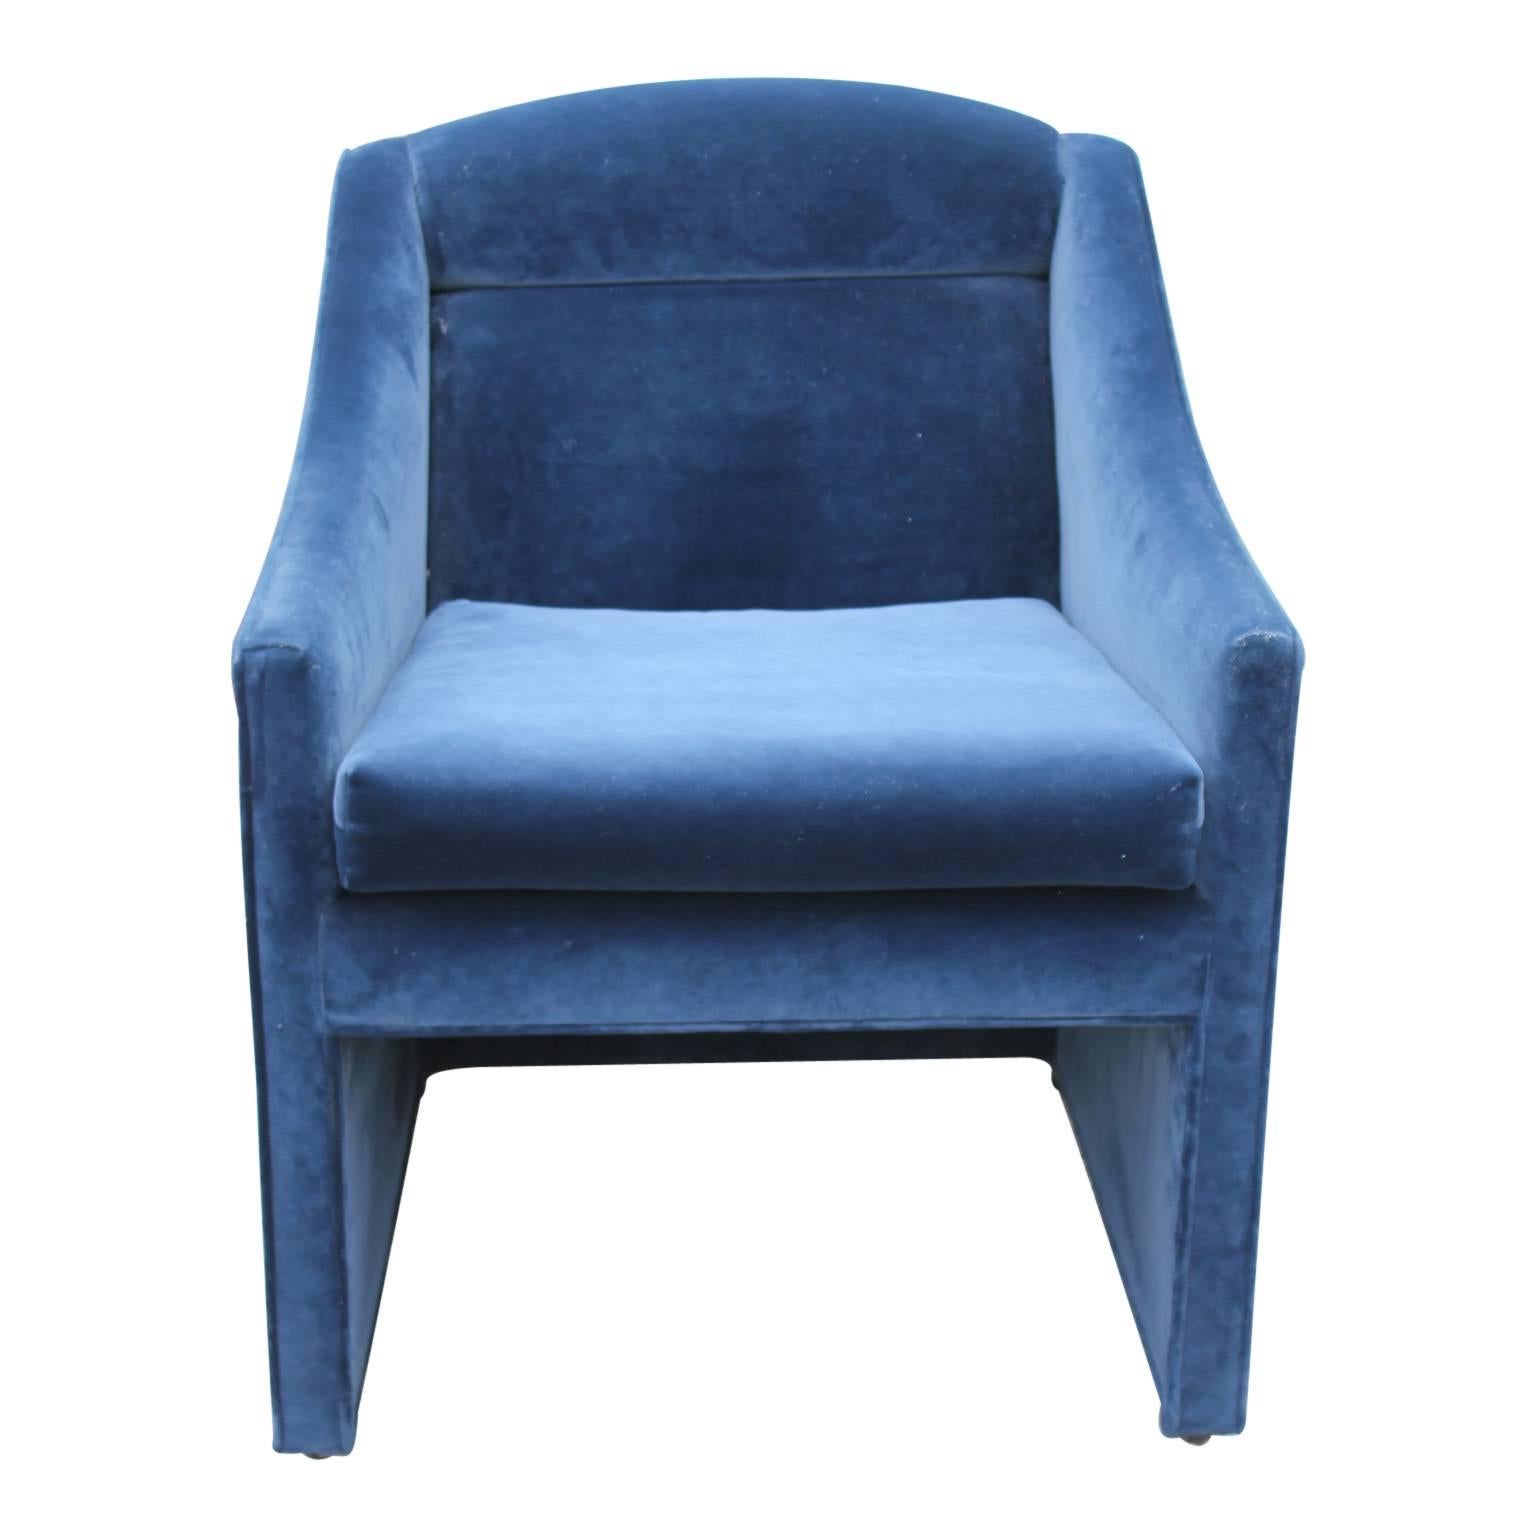 Pair of sophisticated lounge or armchairs in a deep blue velvet color.